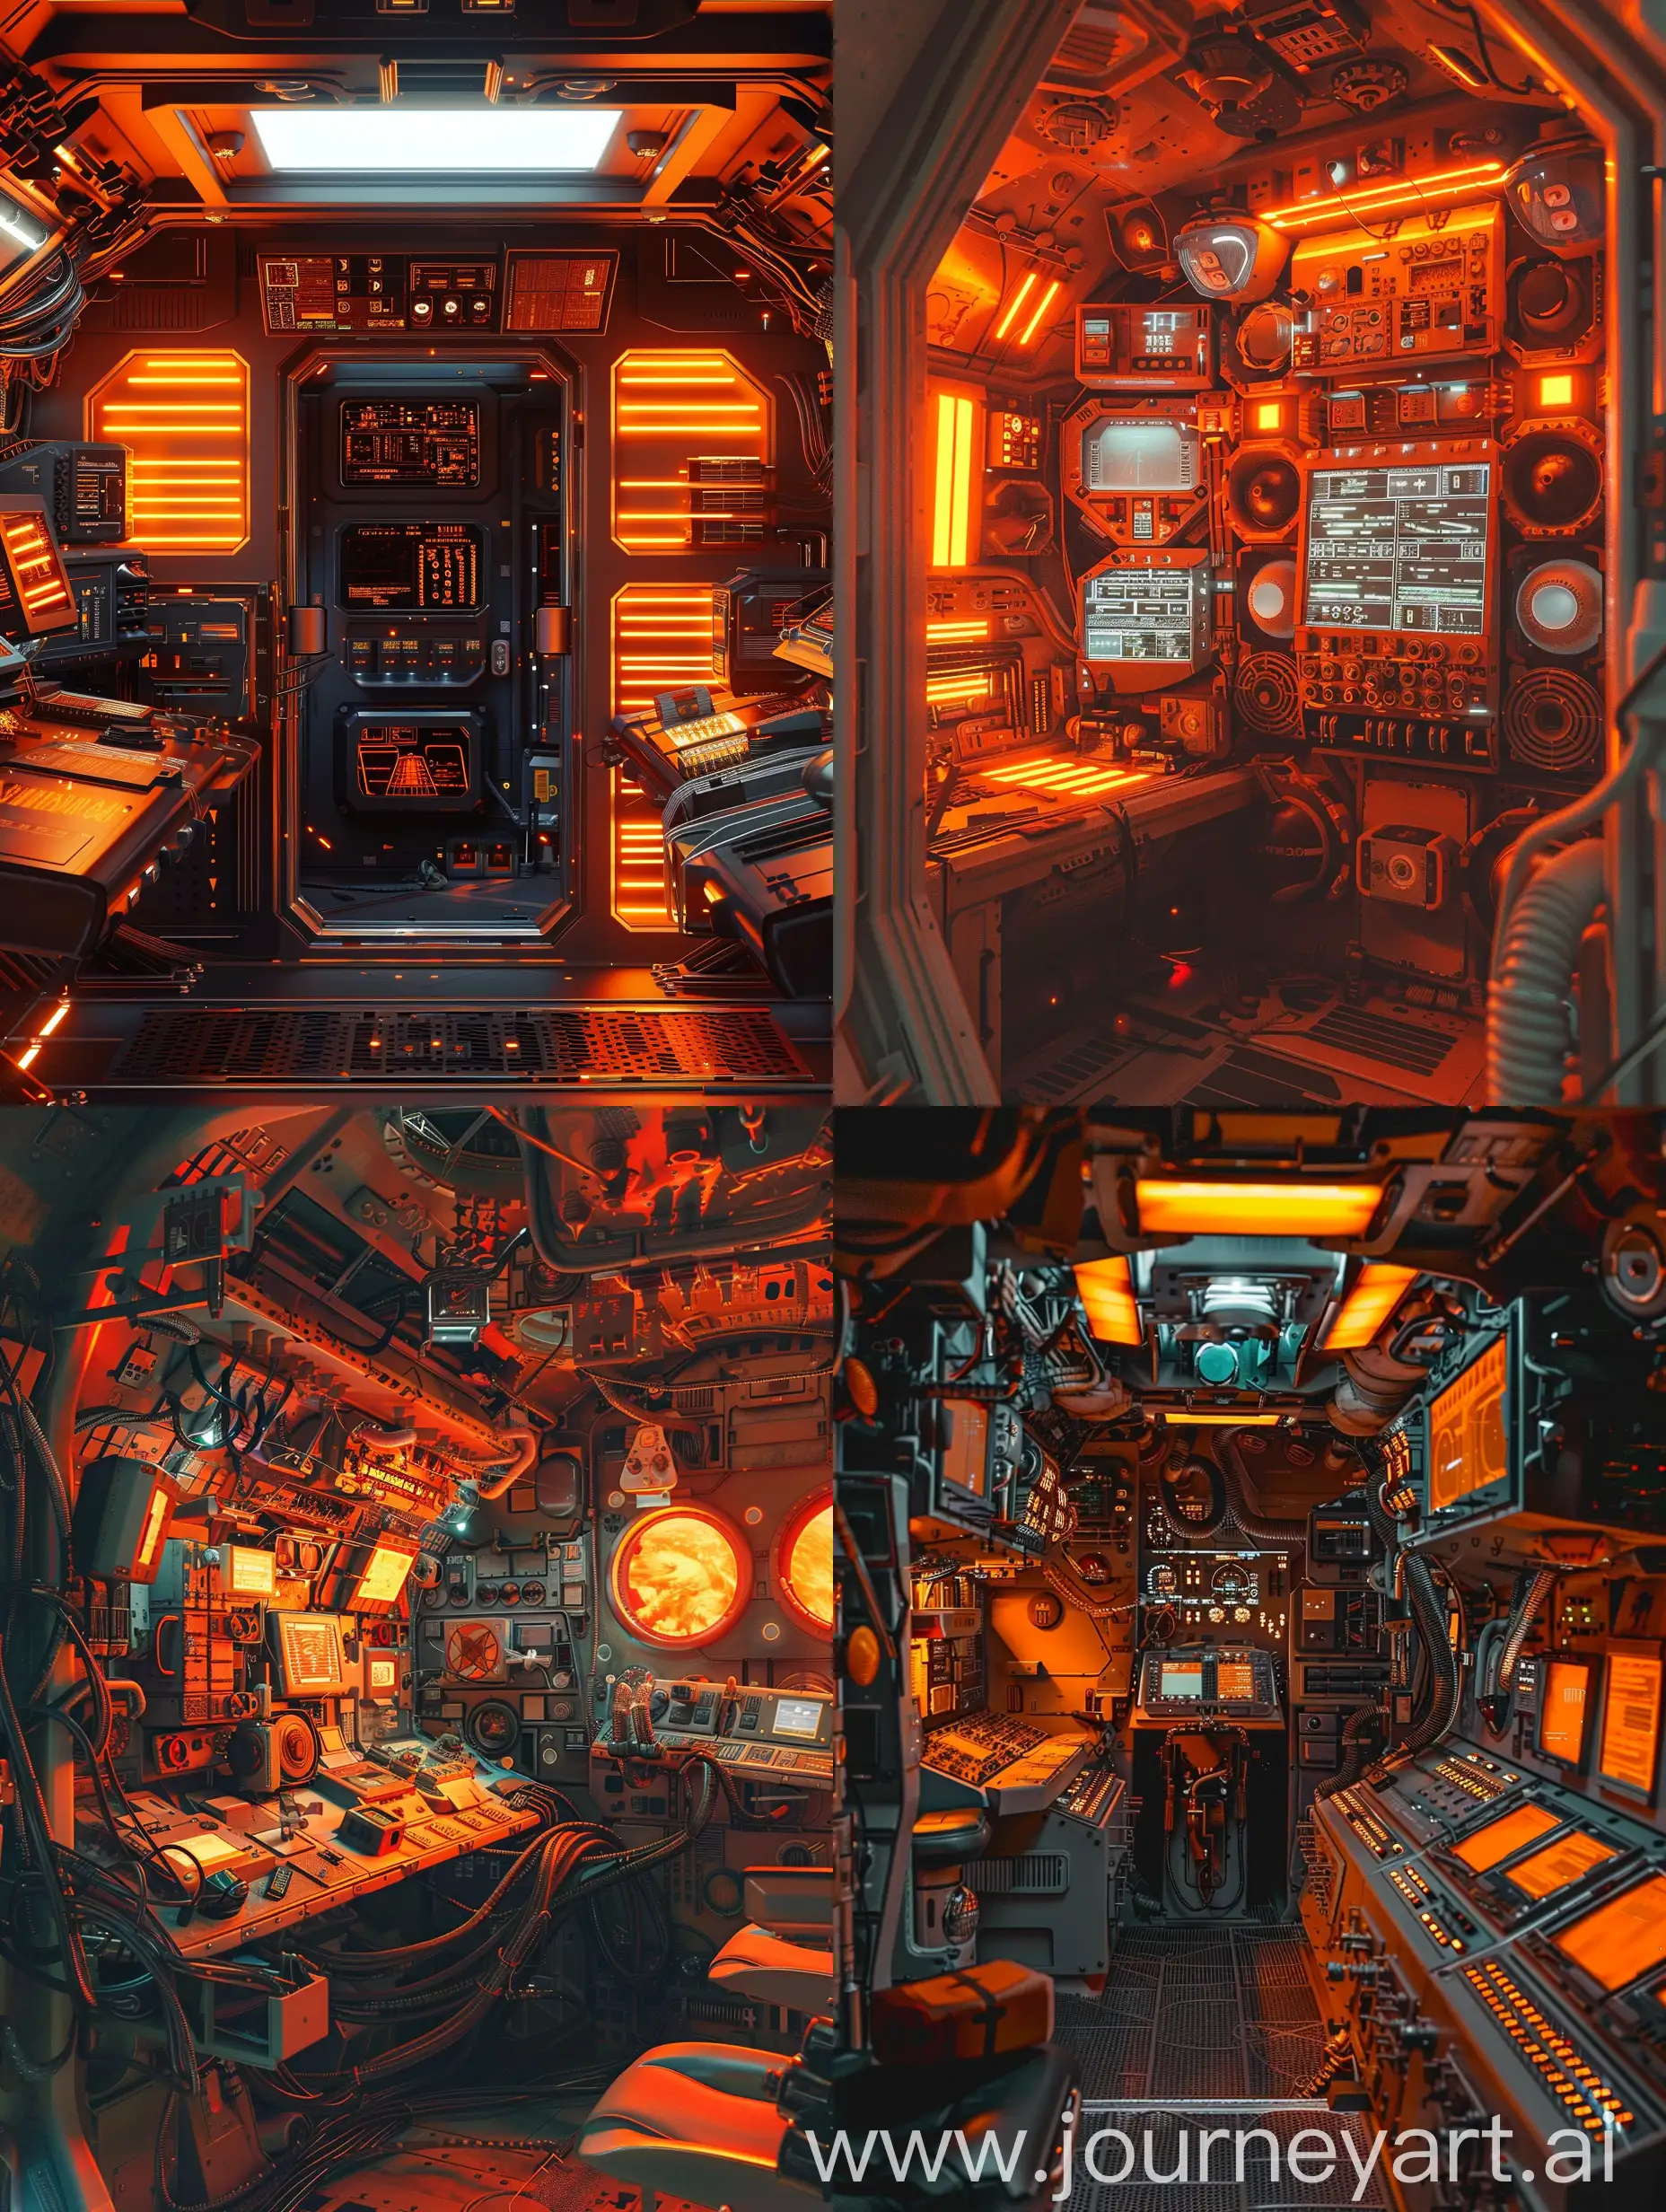 Space ship's cabin in retrofuturism style. A lot of orange light and complex devices